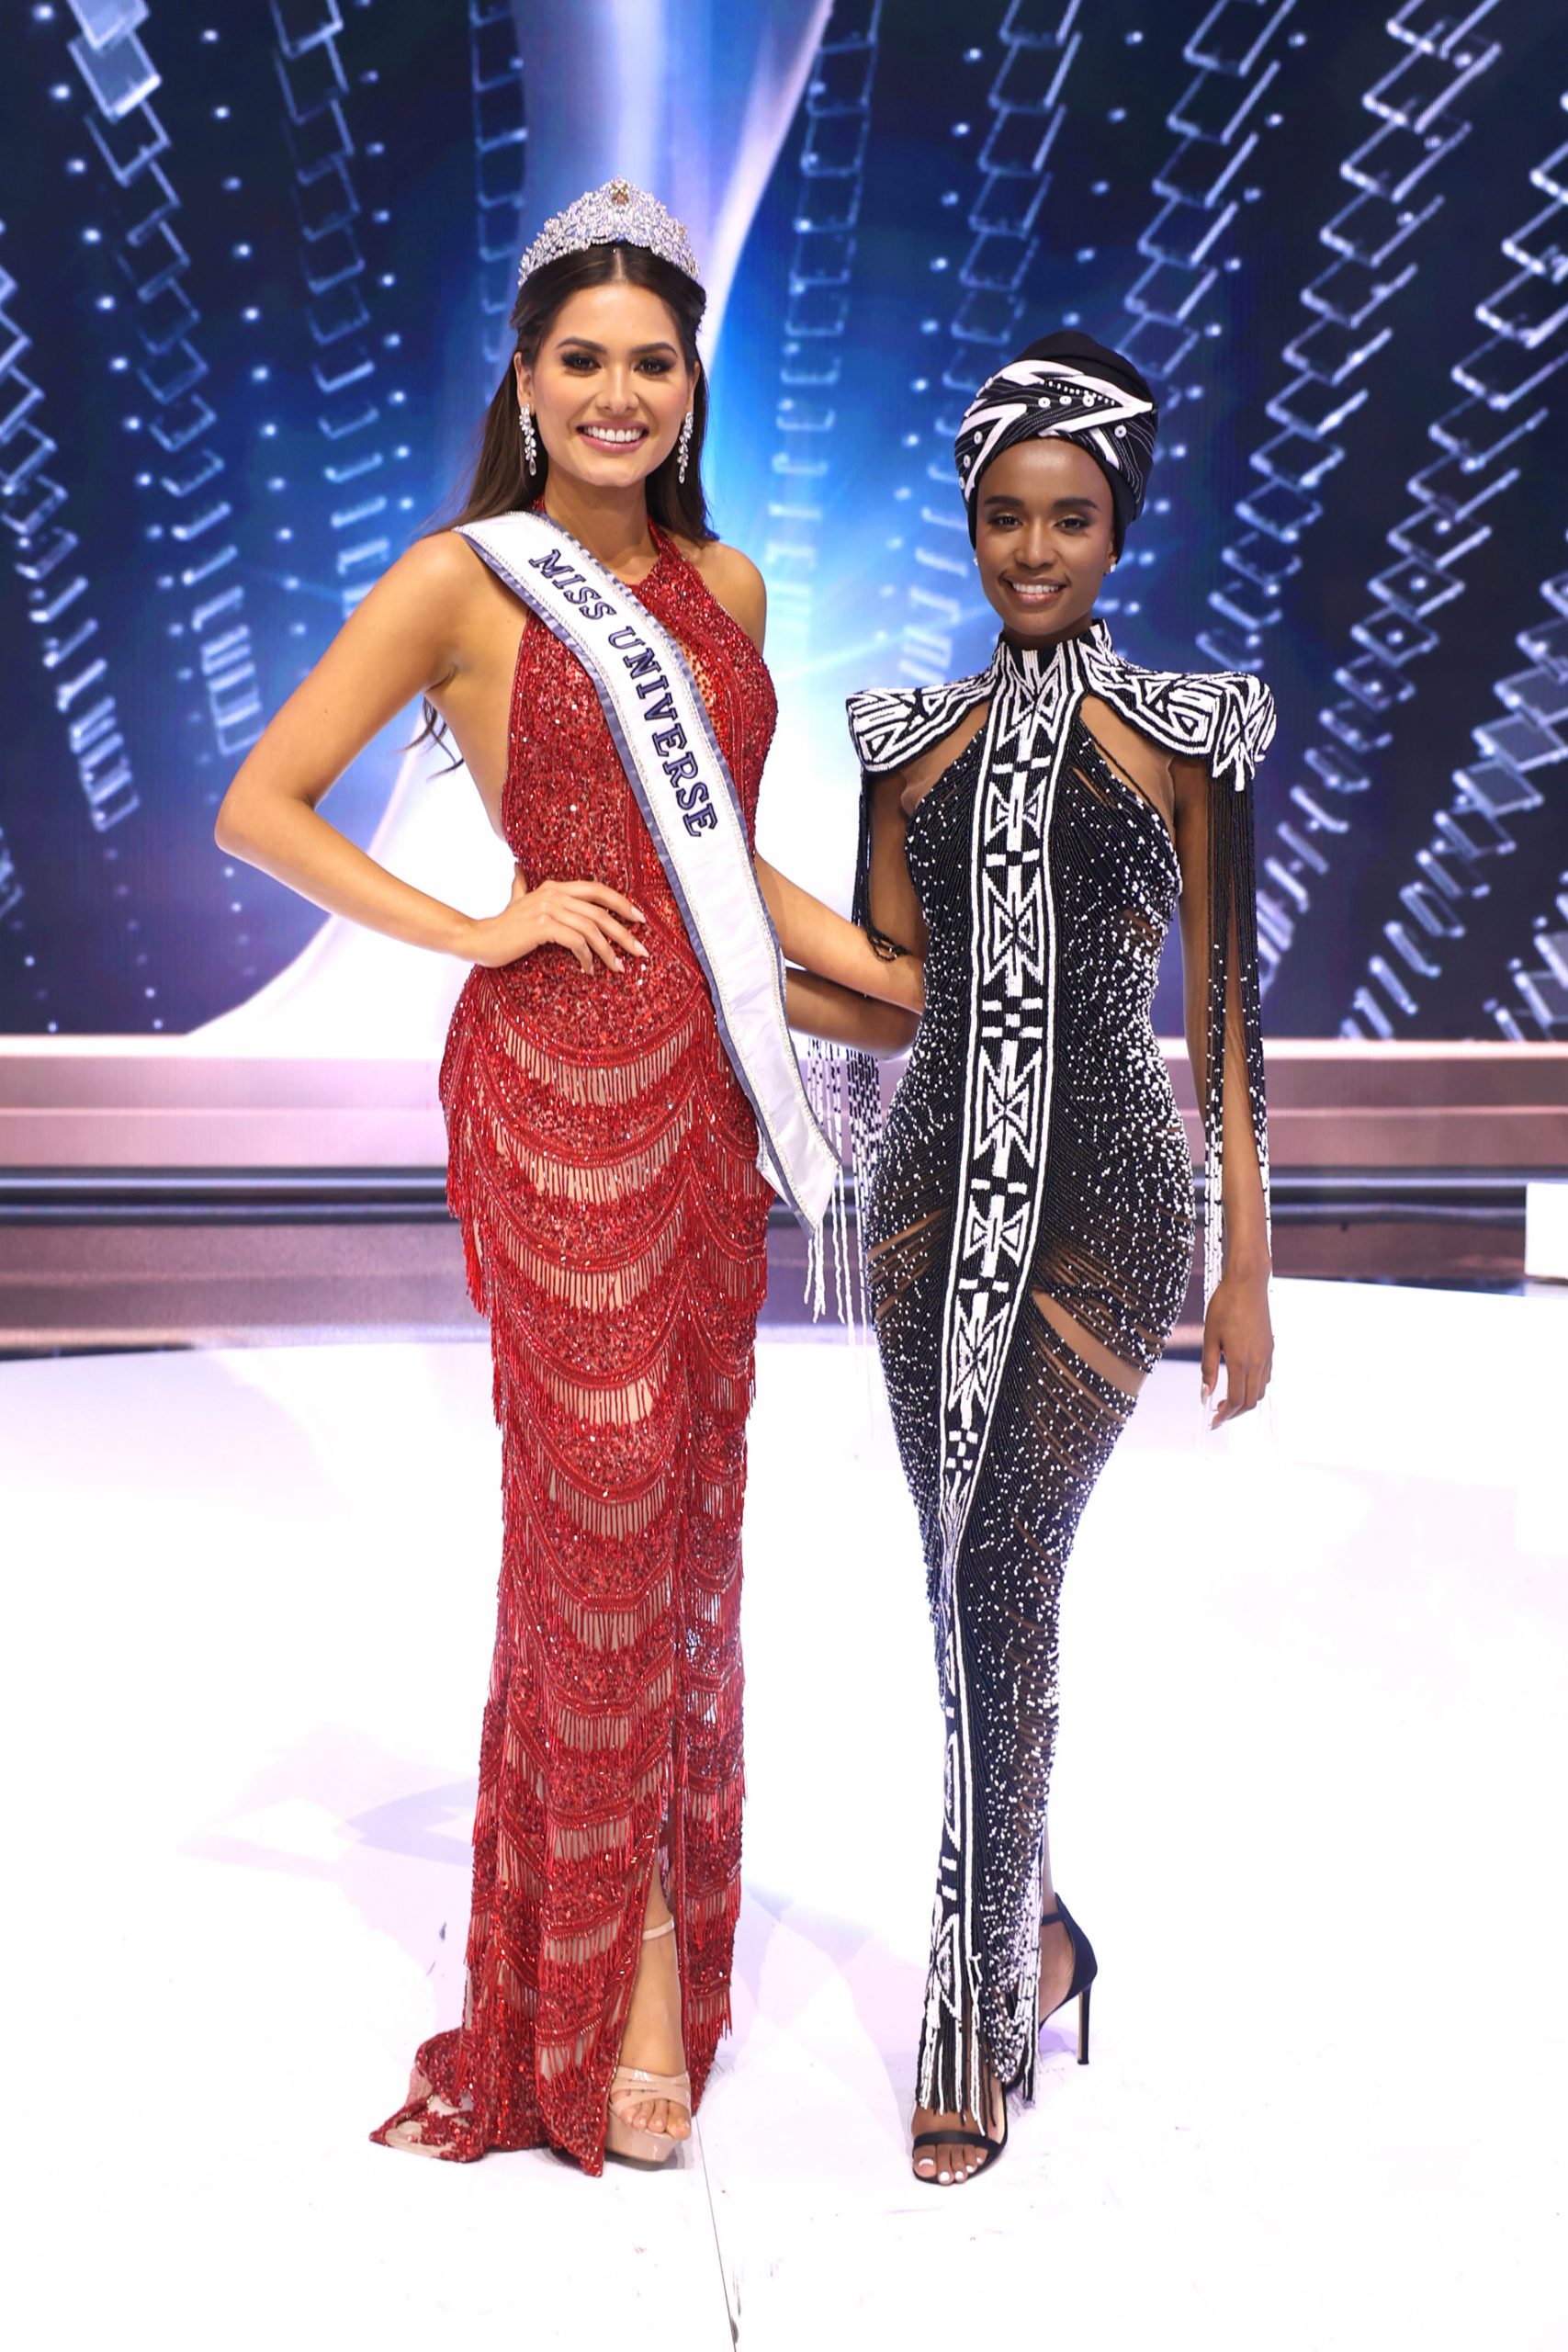 Miss Universo 2019 y Miss Universo 2021